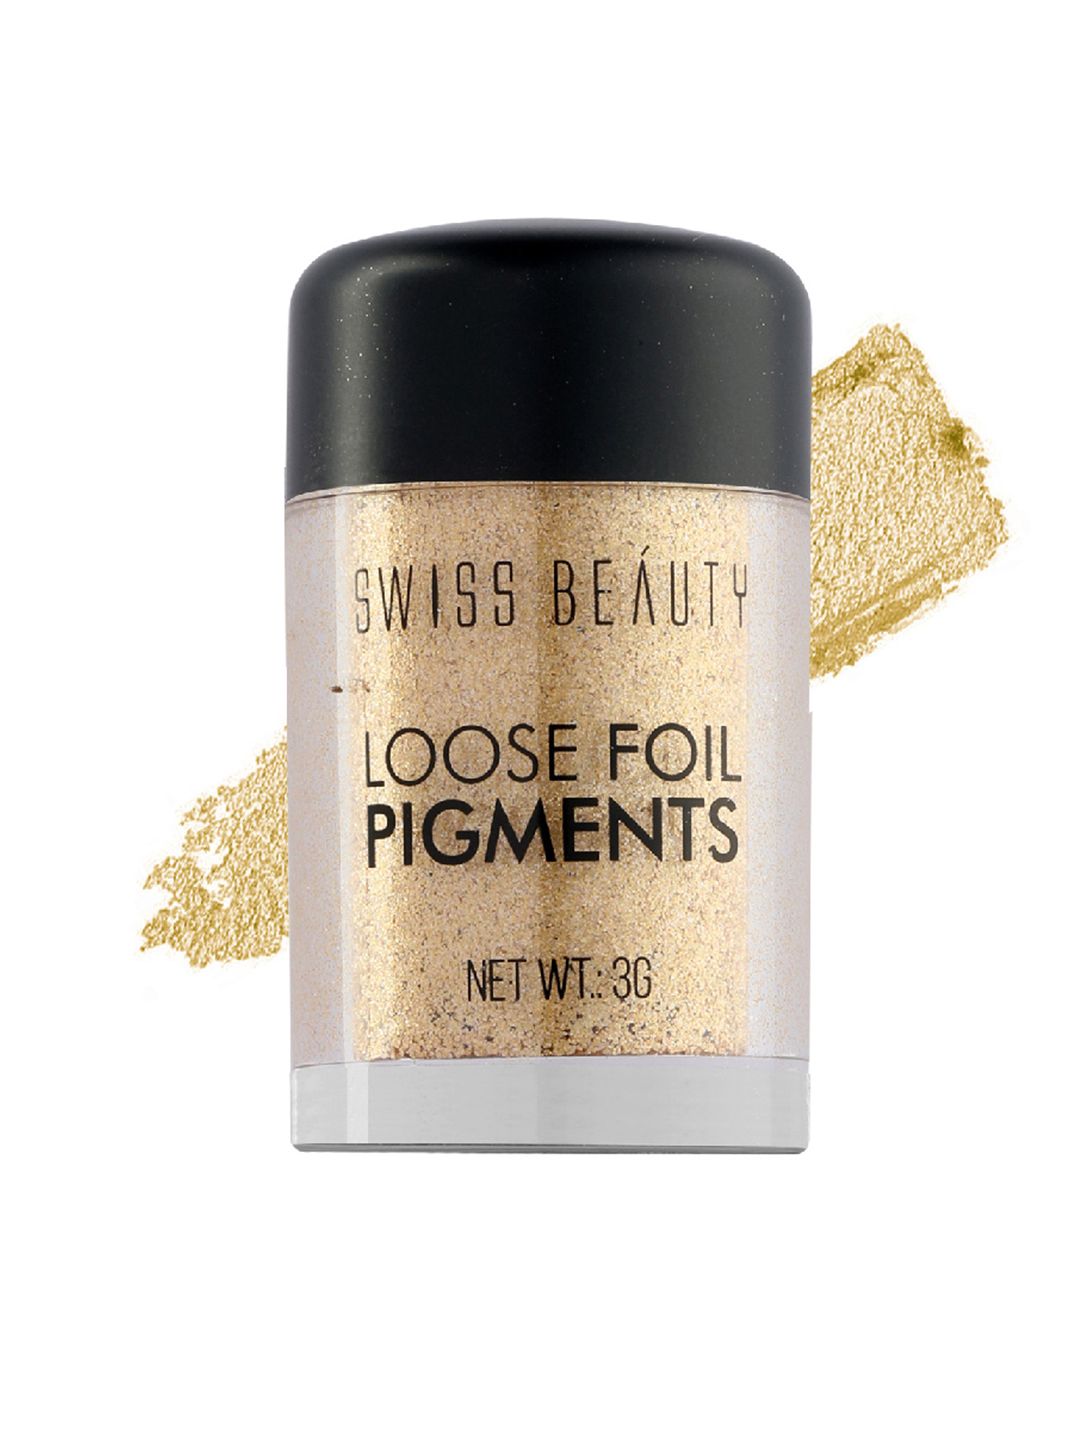 SWISS BEAUTY Loose Foil Pigments Eyeshadow - Shade 10 - 3g Price in India